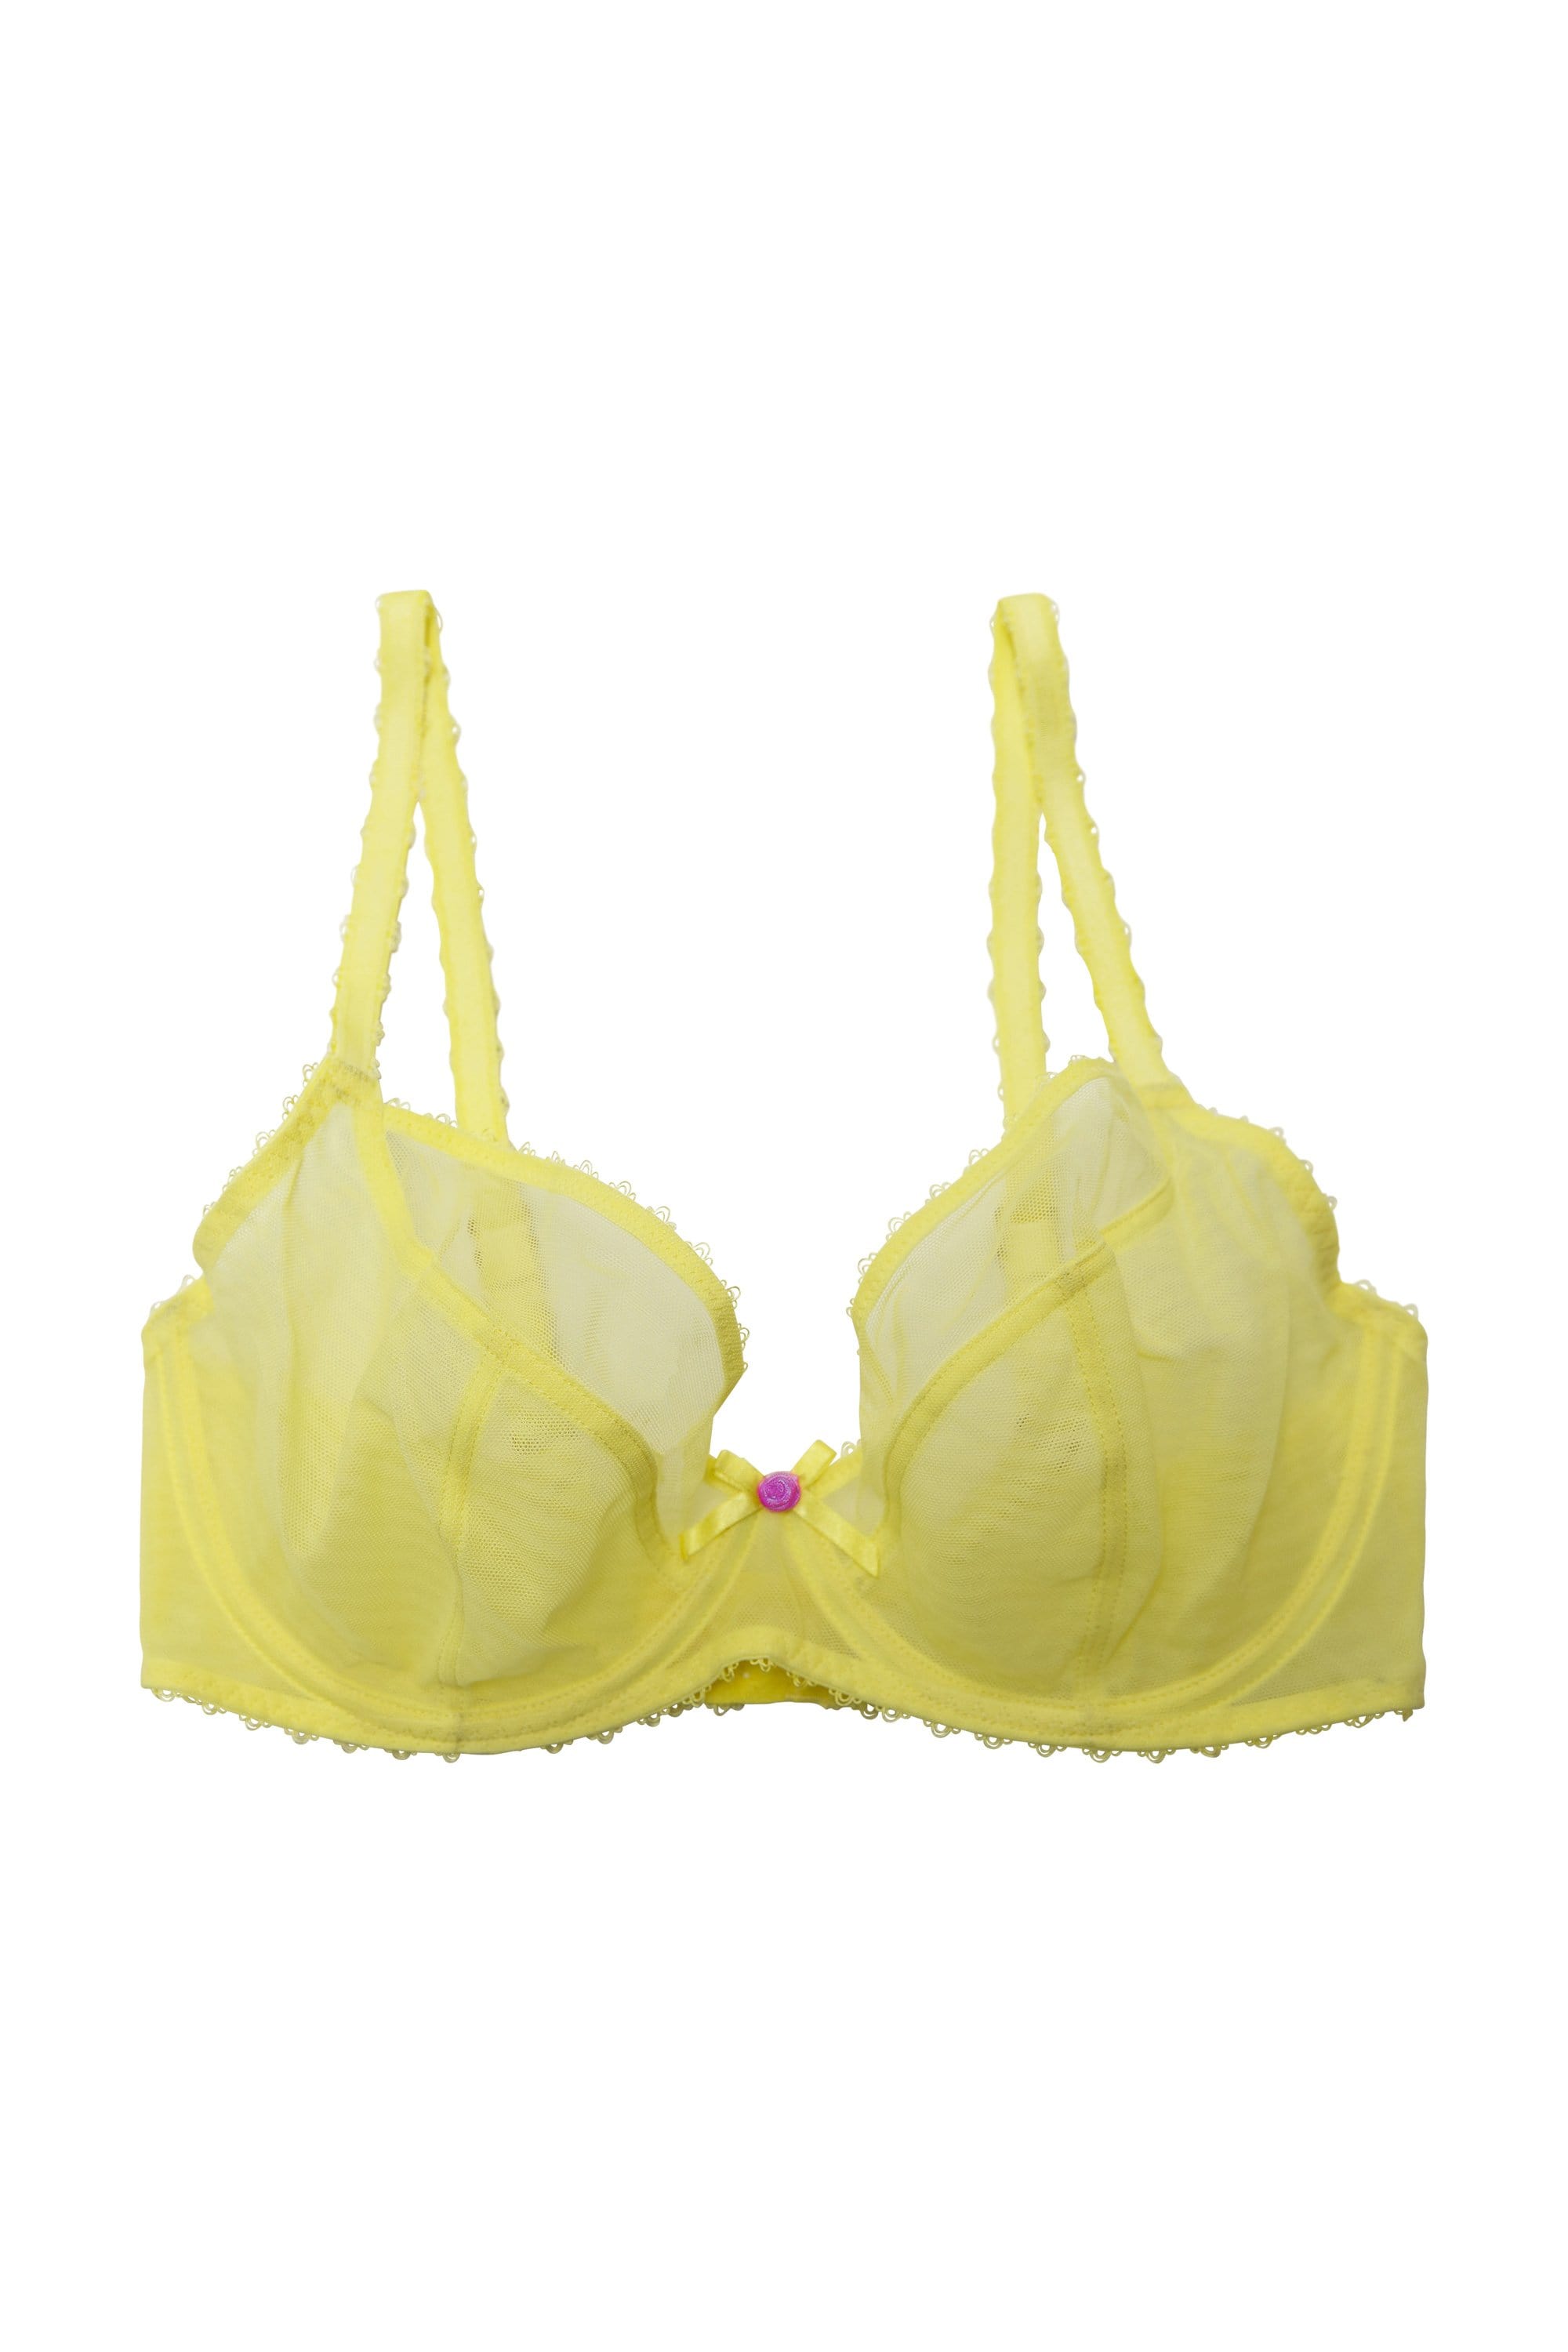 Pour Moi? Pour Moi Fuller Bust Rebel padded lace plunge bra in yellow -  ShopStyle